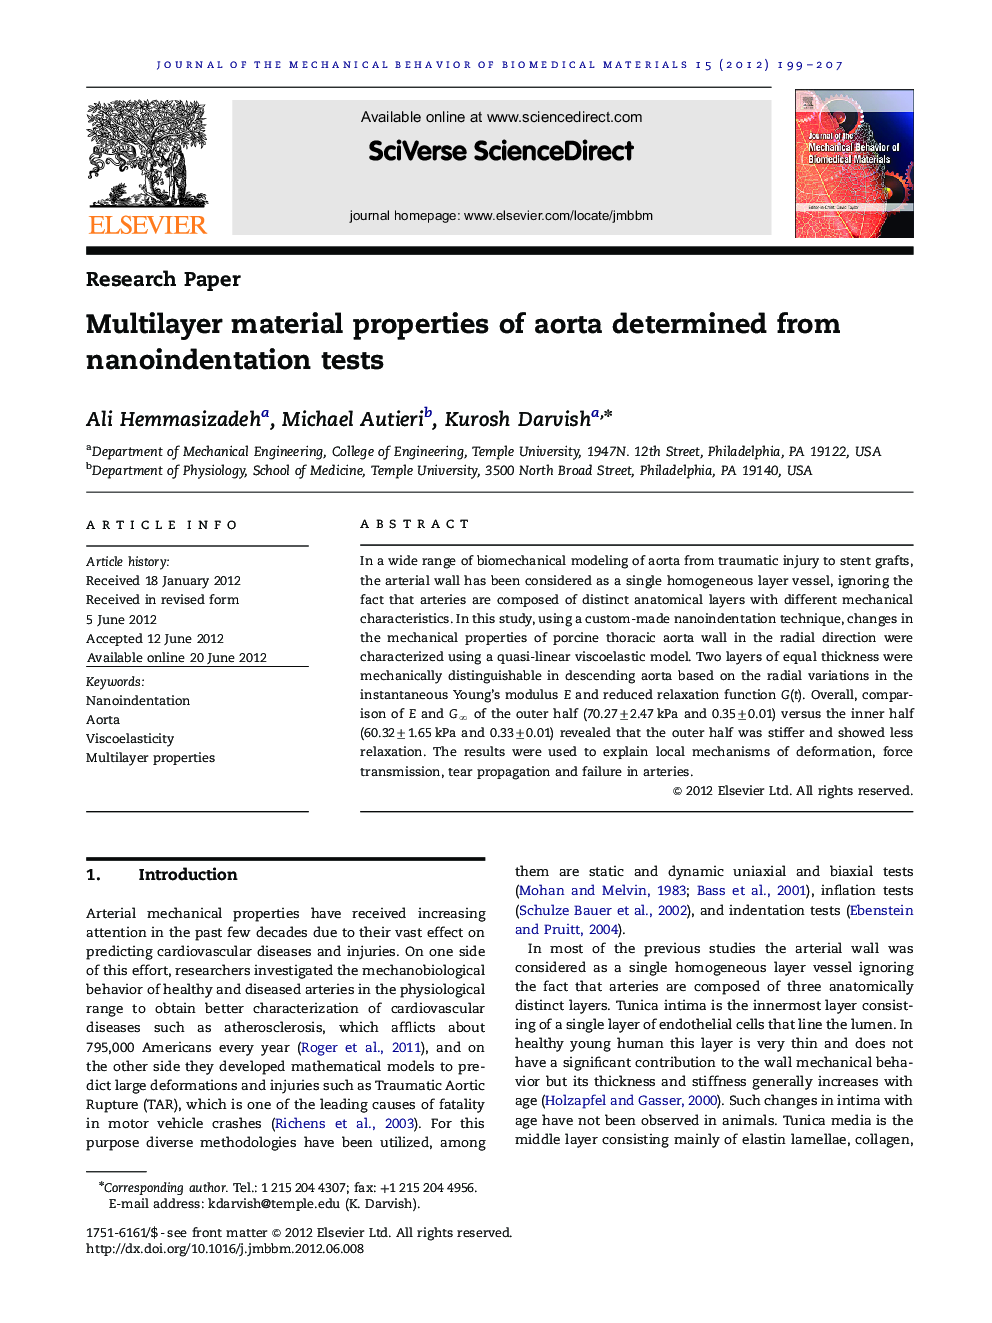 Multilayer material properties of aorta determined from nanoindentation tests